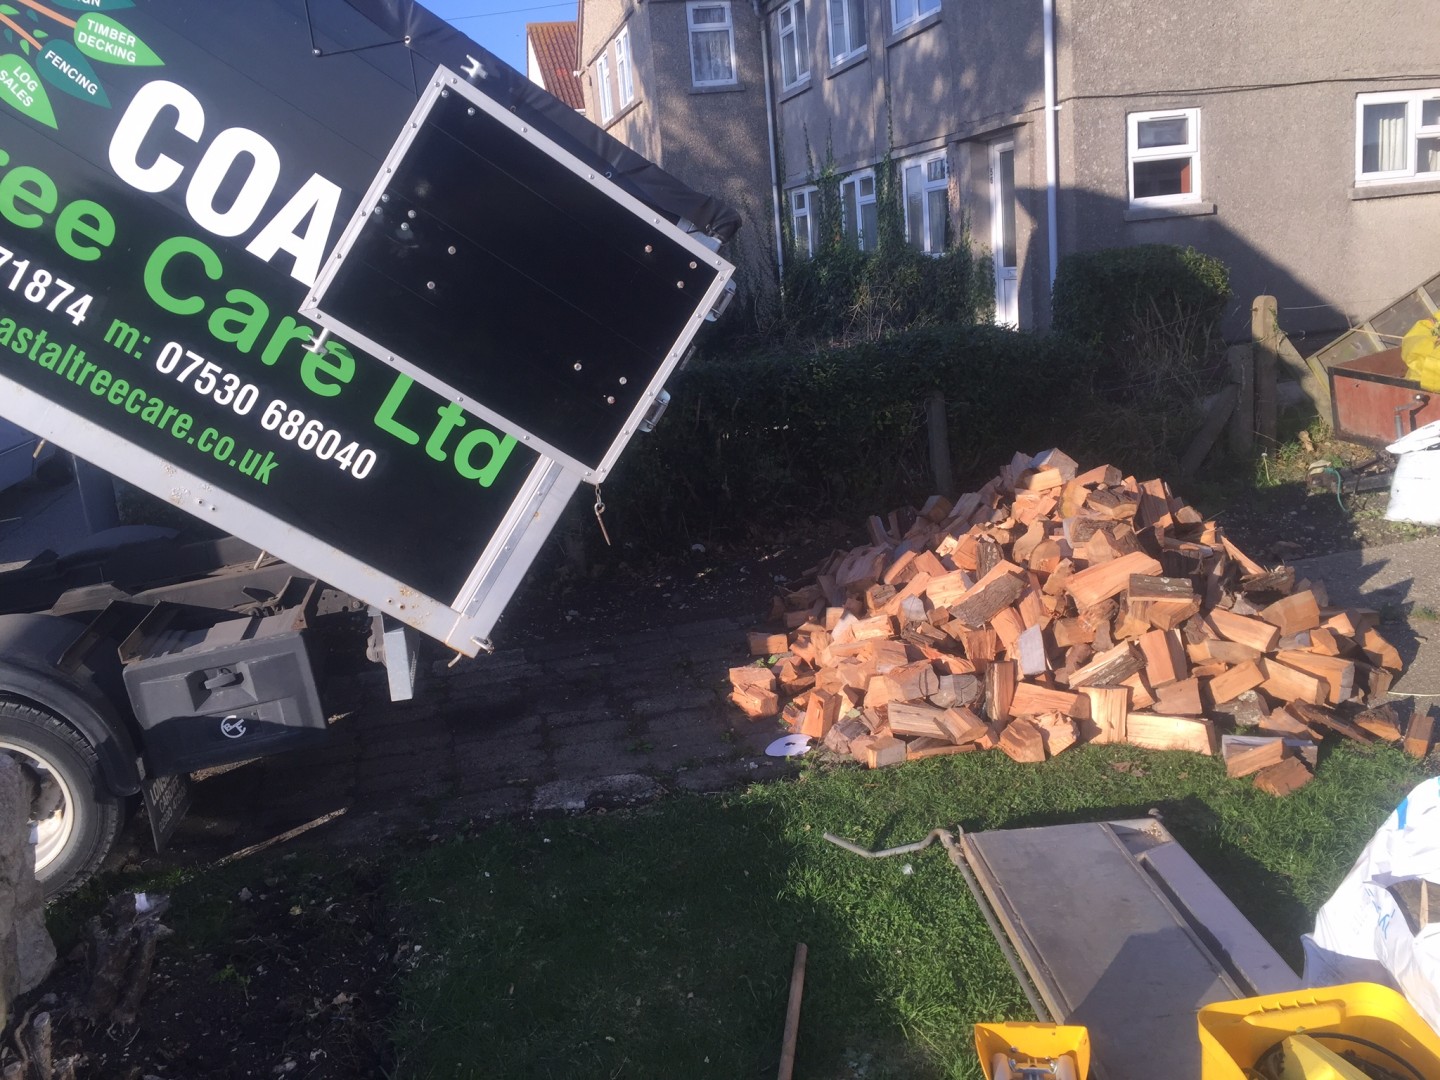 welcome to the wood yard, order your logs now, seasoned logs, logs, firewood, firewood logs, seasoned firewood logs, seasoned firewood, seasoned hardwood, seasoned mixed logs, seasoned softwood logs, log yard, log pile, log store, loading firewood, loading logs